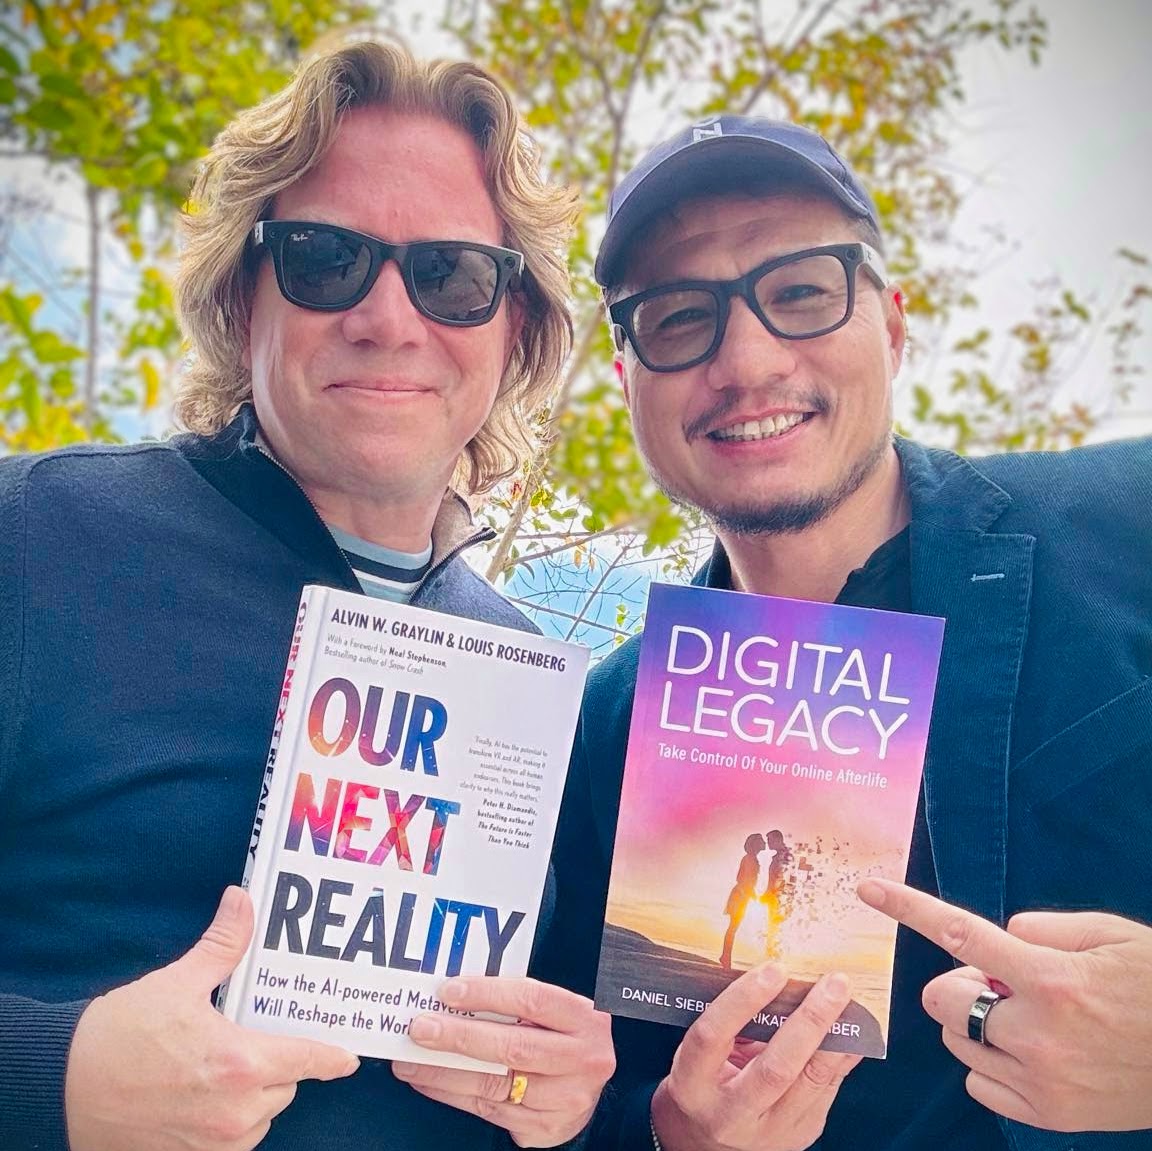 🚀 📚 Started reading 'Our Next Reality' by @AGraylin and Louis Rosenberg, a debate-style book. It's a must-read for anyone interested in how #AI is becoming the most pivotal technology together with #XR in shaping our reality. Dive in for a balanced, eye-opening discussion! 🤖